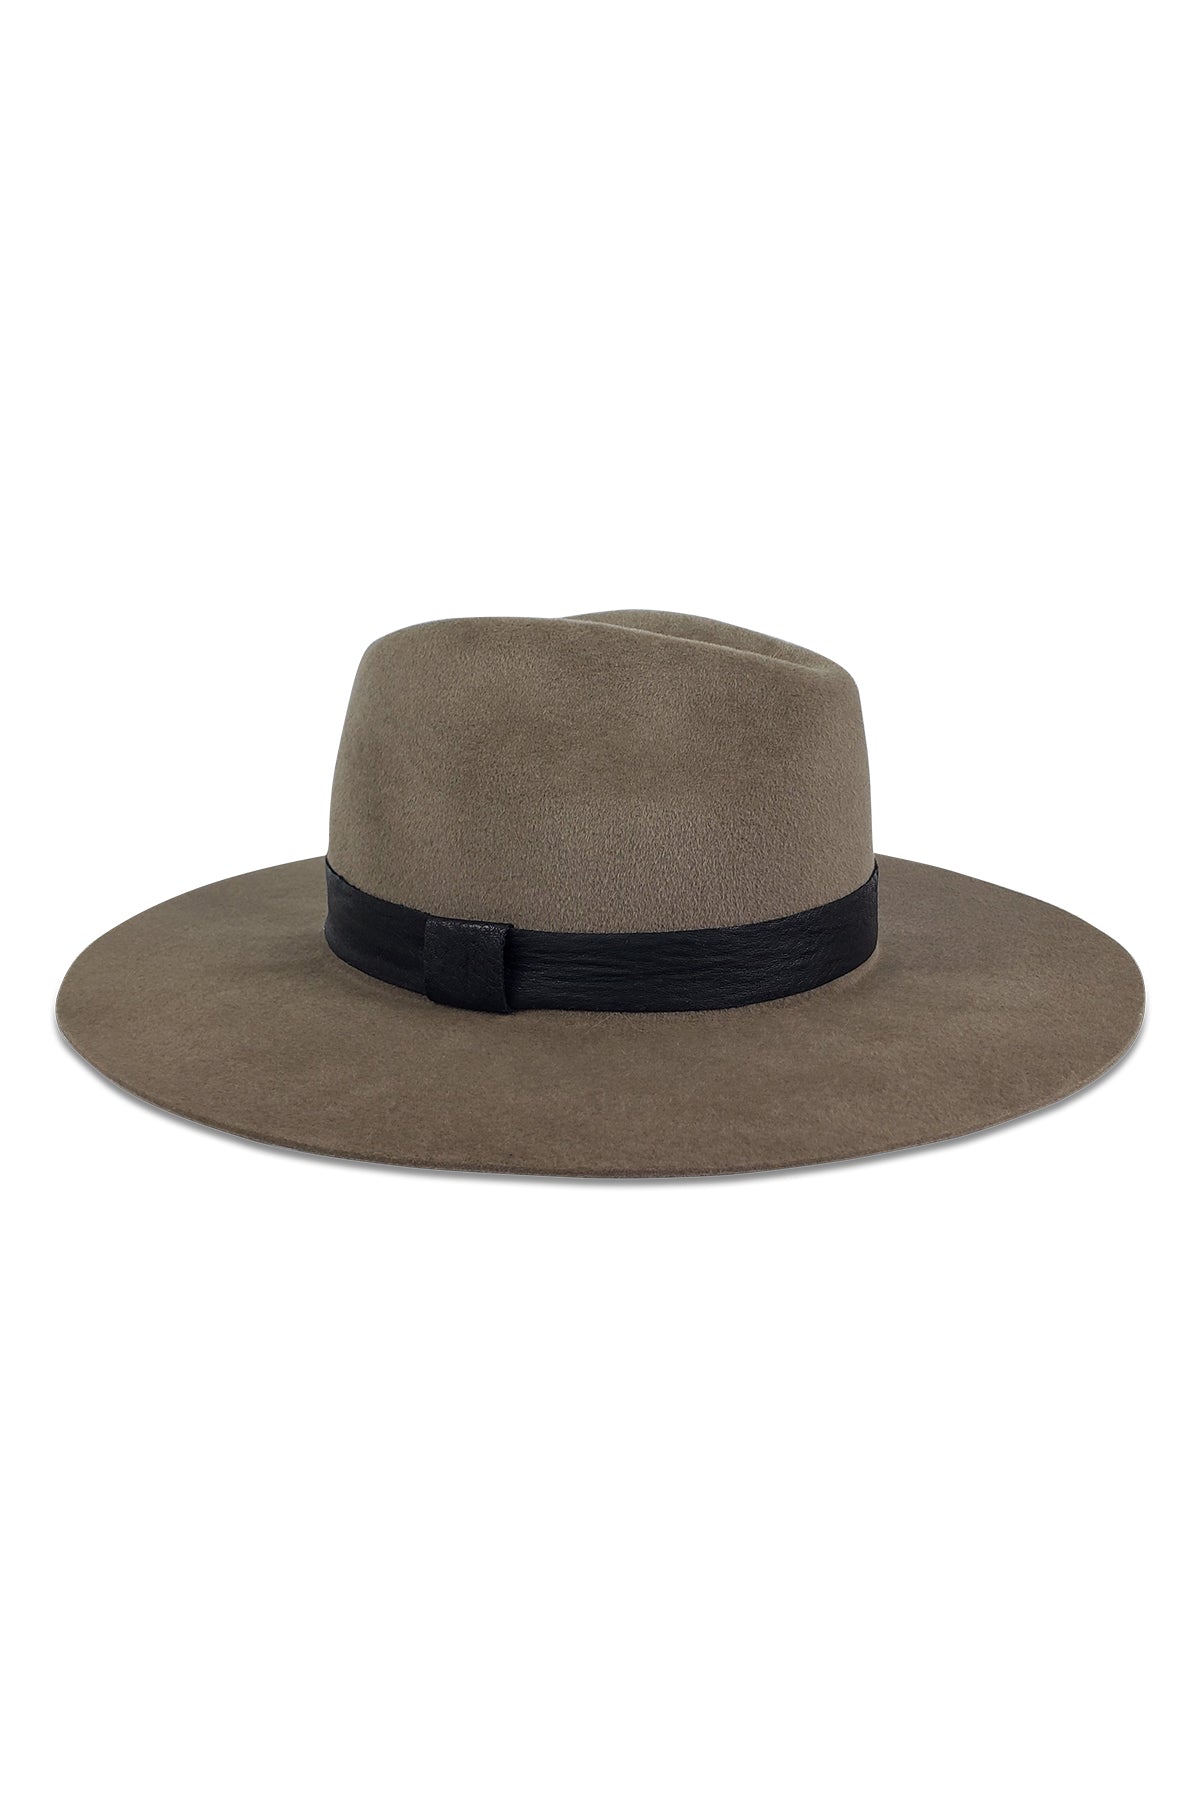 A timeless LUXE AVA FEDORA hat by Velvet by Graham & Spencer with a soft velour texture and a black band on a white background.-8031441190993